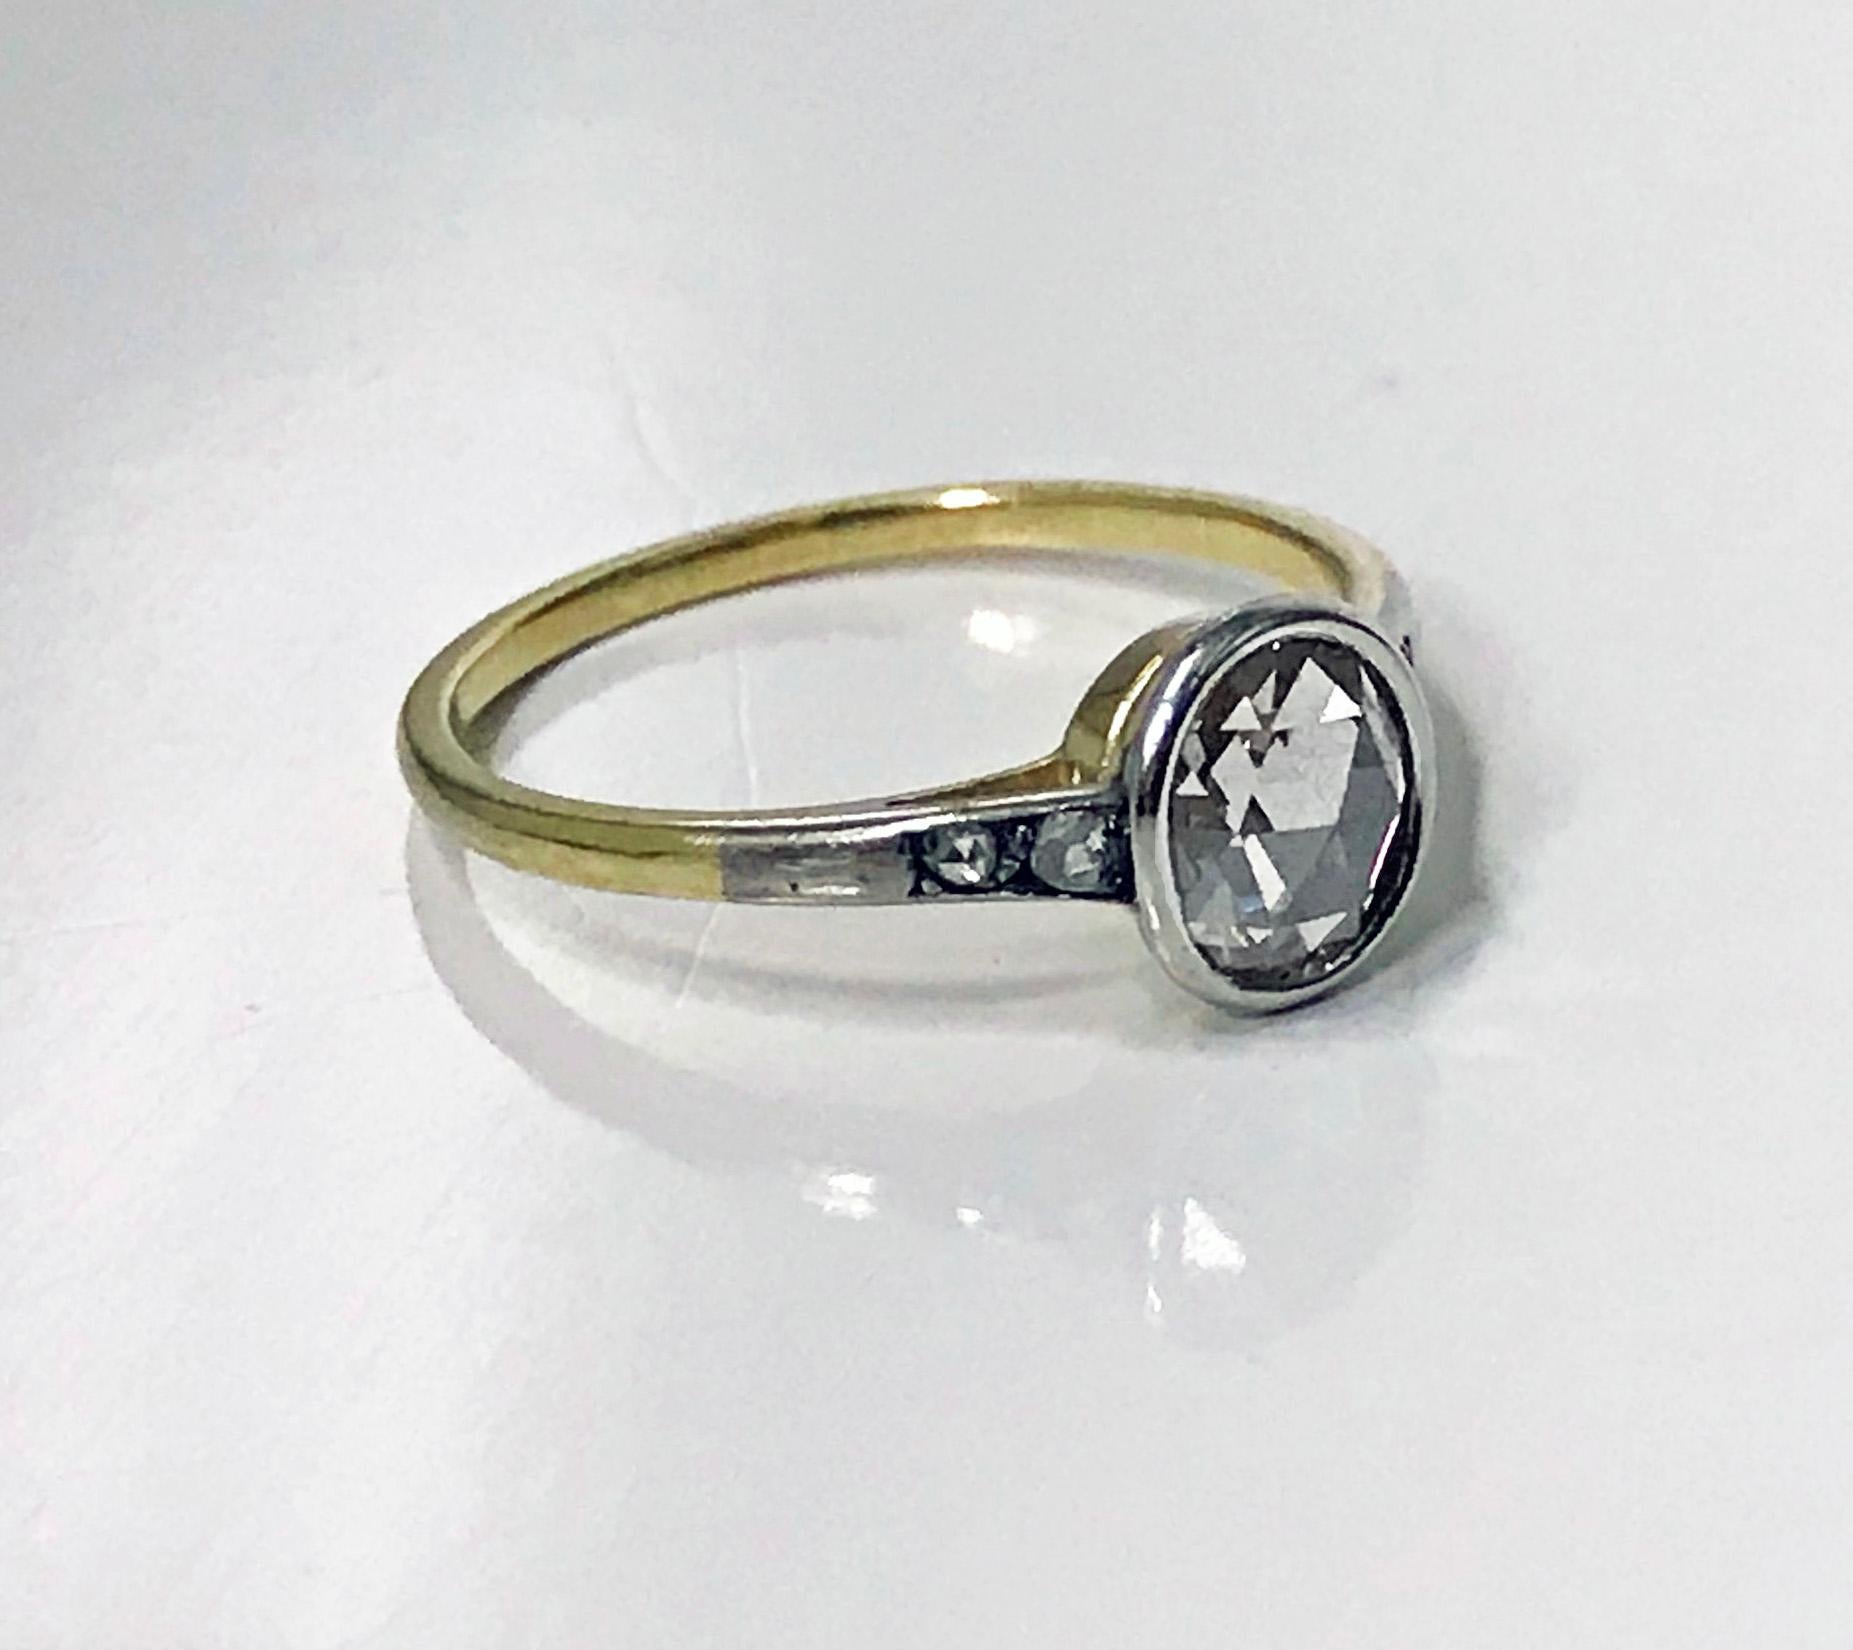 Antique Diamond Ring C.1920, Platinum and 14K Gold, acid tested . The Ring bezel set with an oval rose cut diamond gauging approximately 7.0 x 6.0 mm, approximately 0.55 ct, diamond weight, depth estimated due to closed back setting, approximately